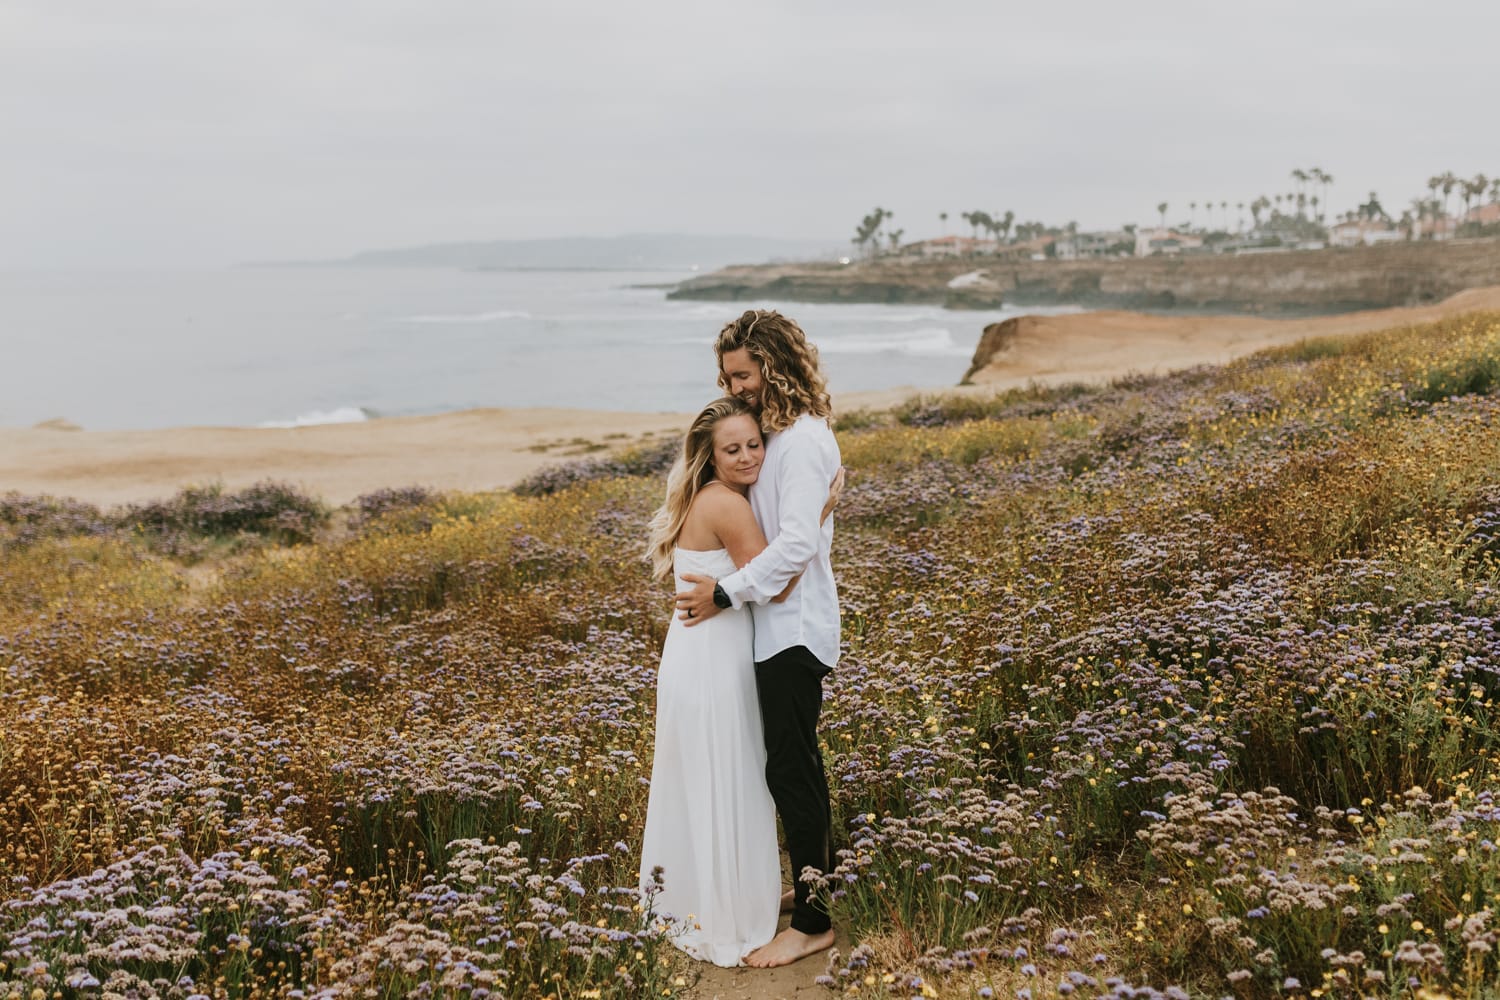 A bride and groom hugging by the coast of California on their wedding day.